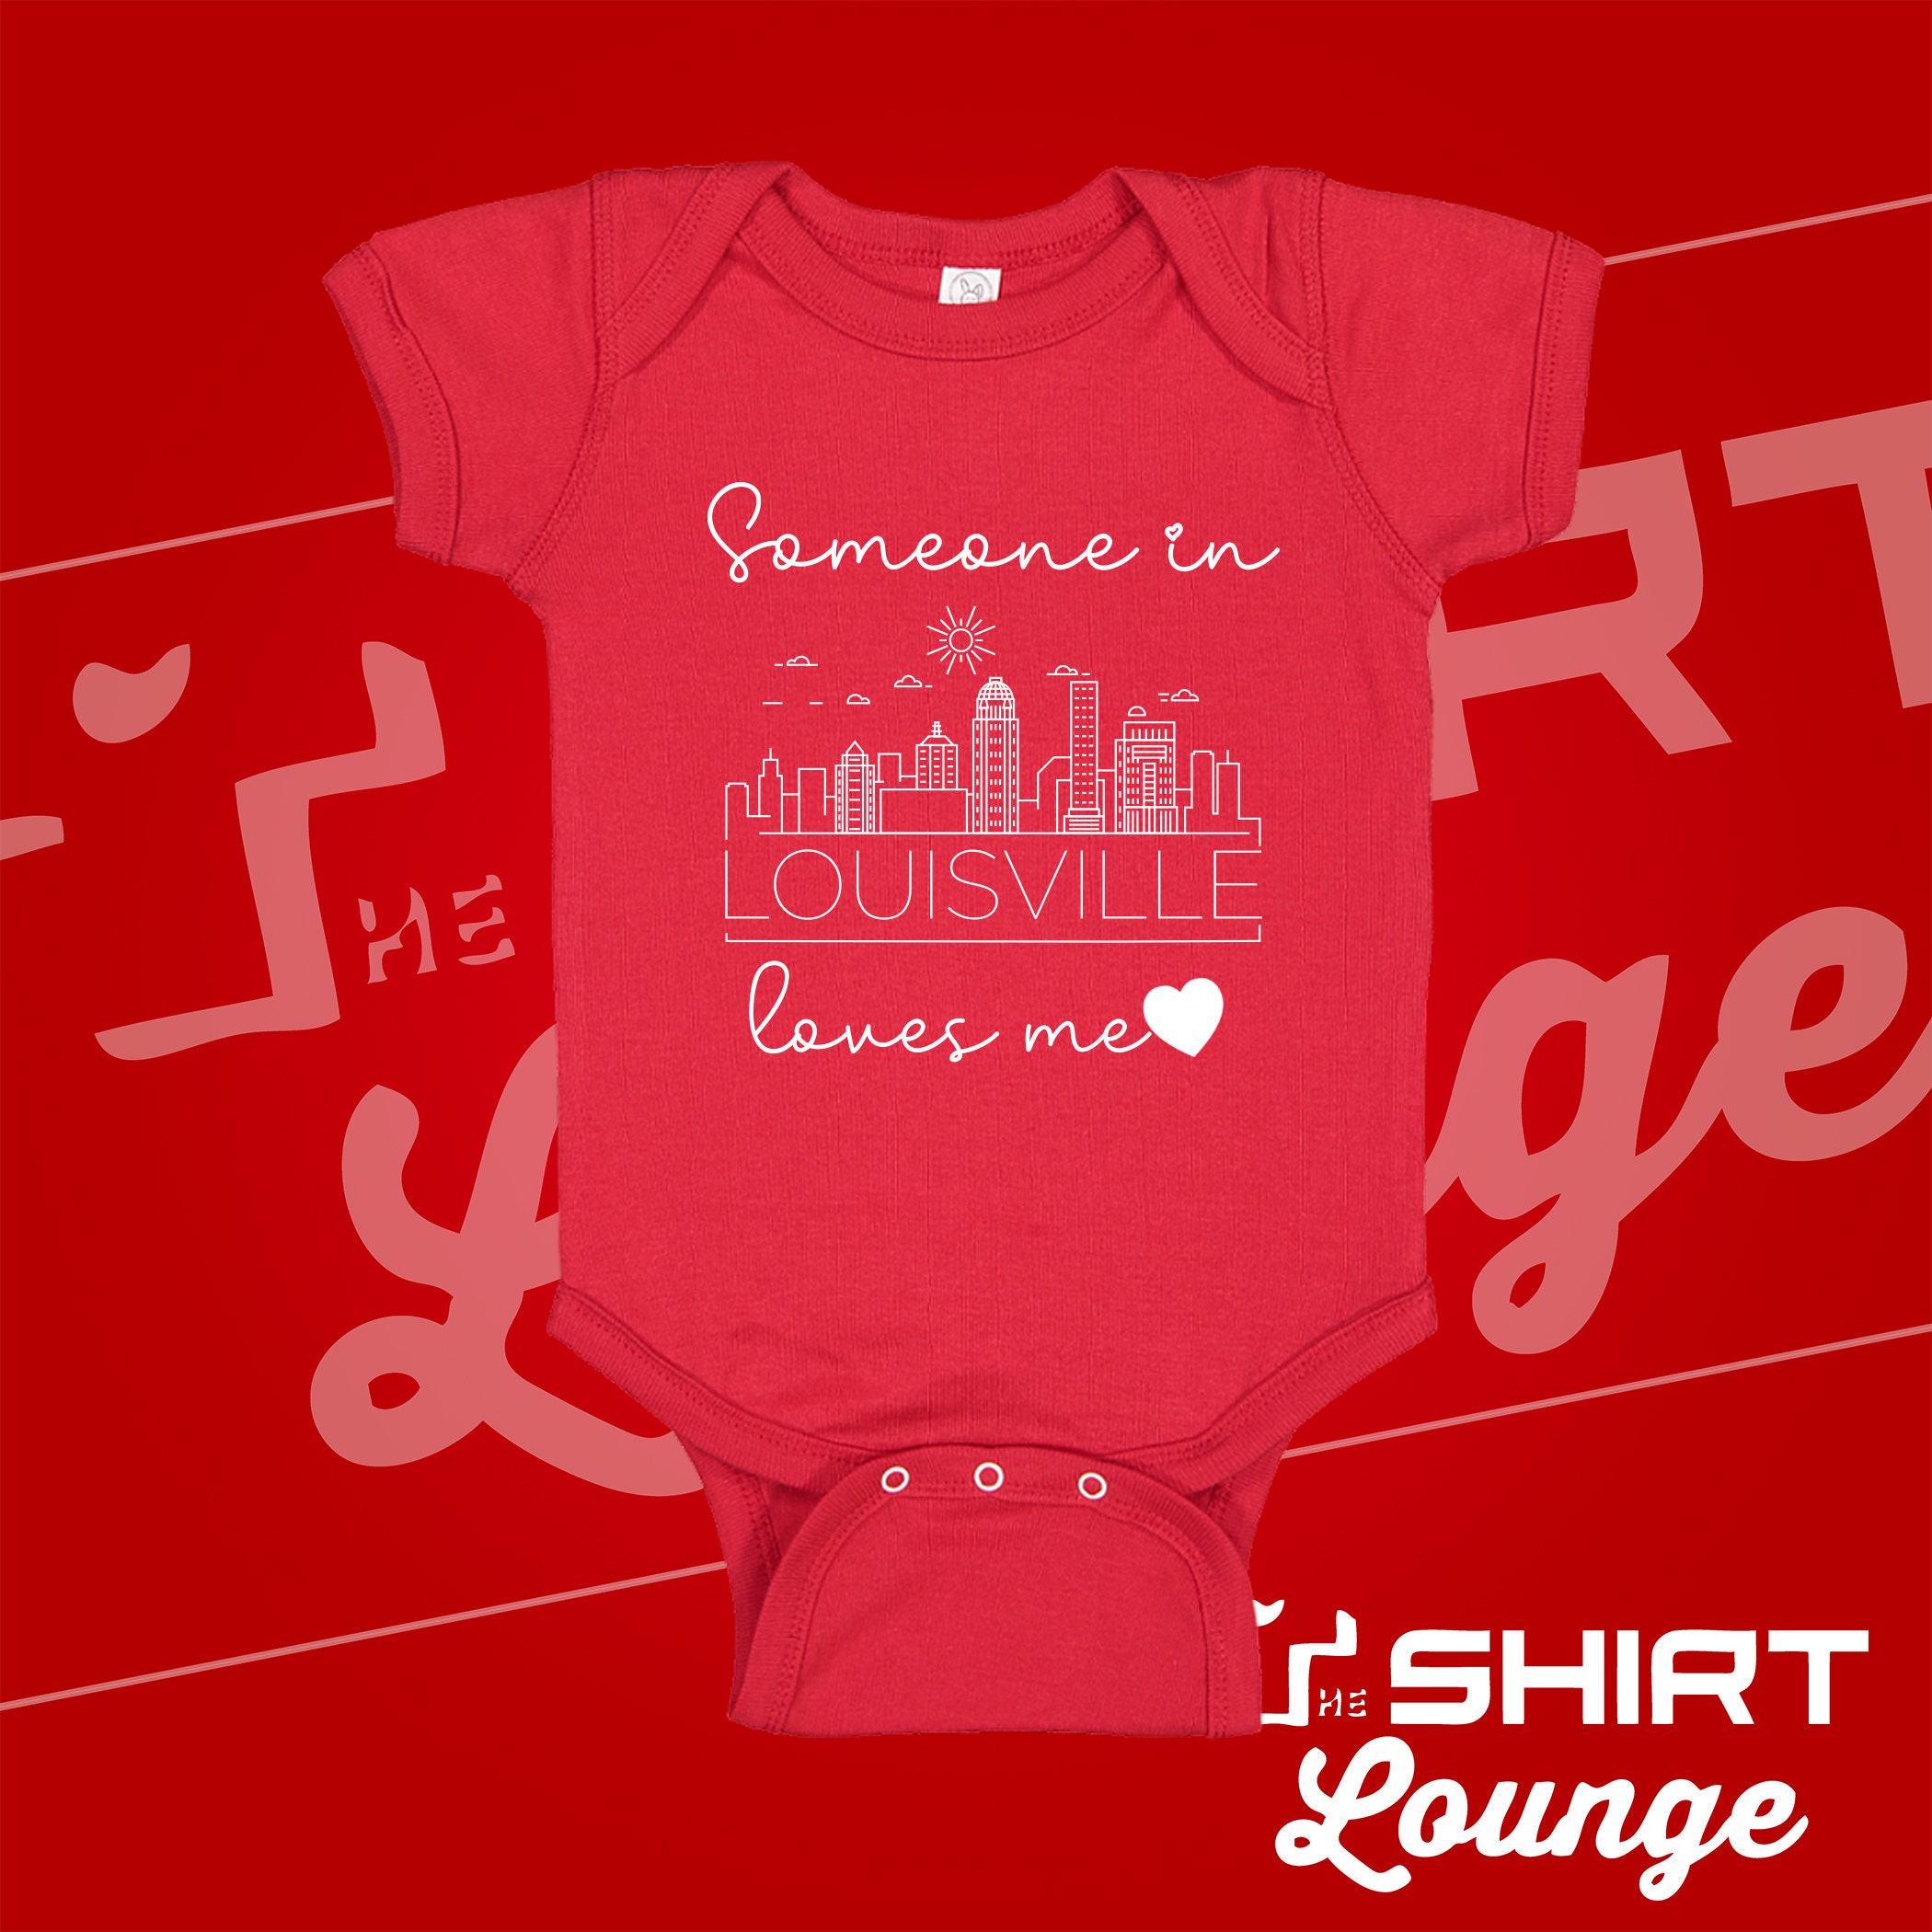 Louisville Baby One Piece | Someone Loves Me in Louisville Bodysuit | Somebody Loves Me in Kentucky | Long Distance Baby Gift | KY City